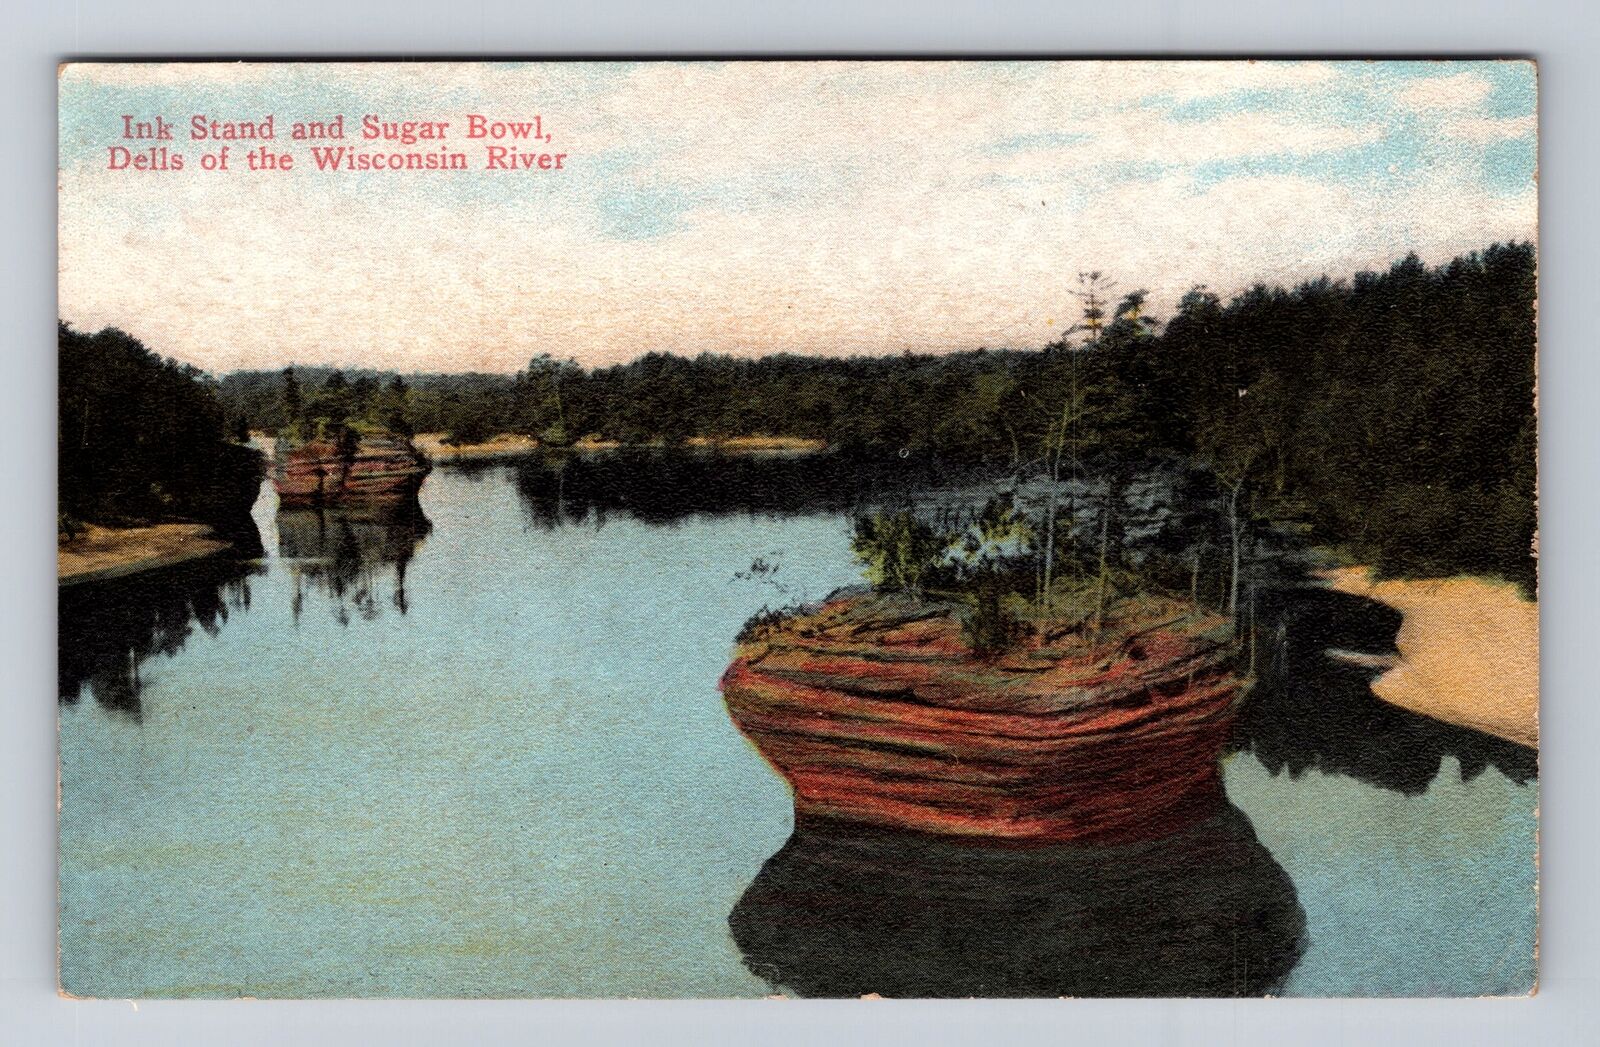 Dells Of Wisconsin River WI-Wisconsin, Ink Stand, Sugar Bowl, Vintage Postcard